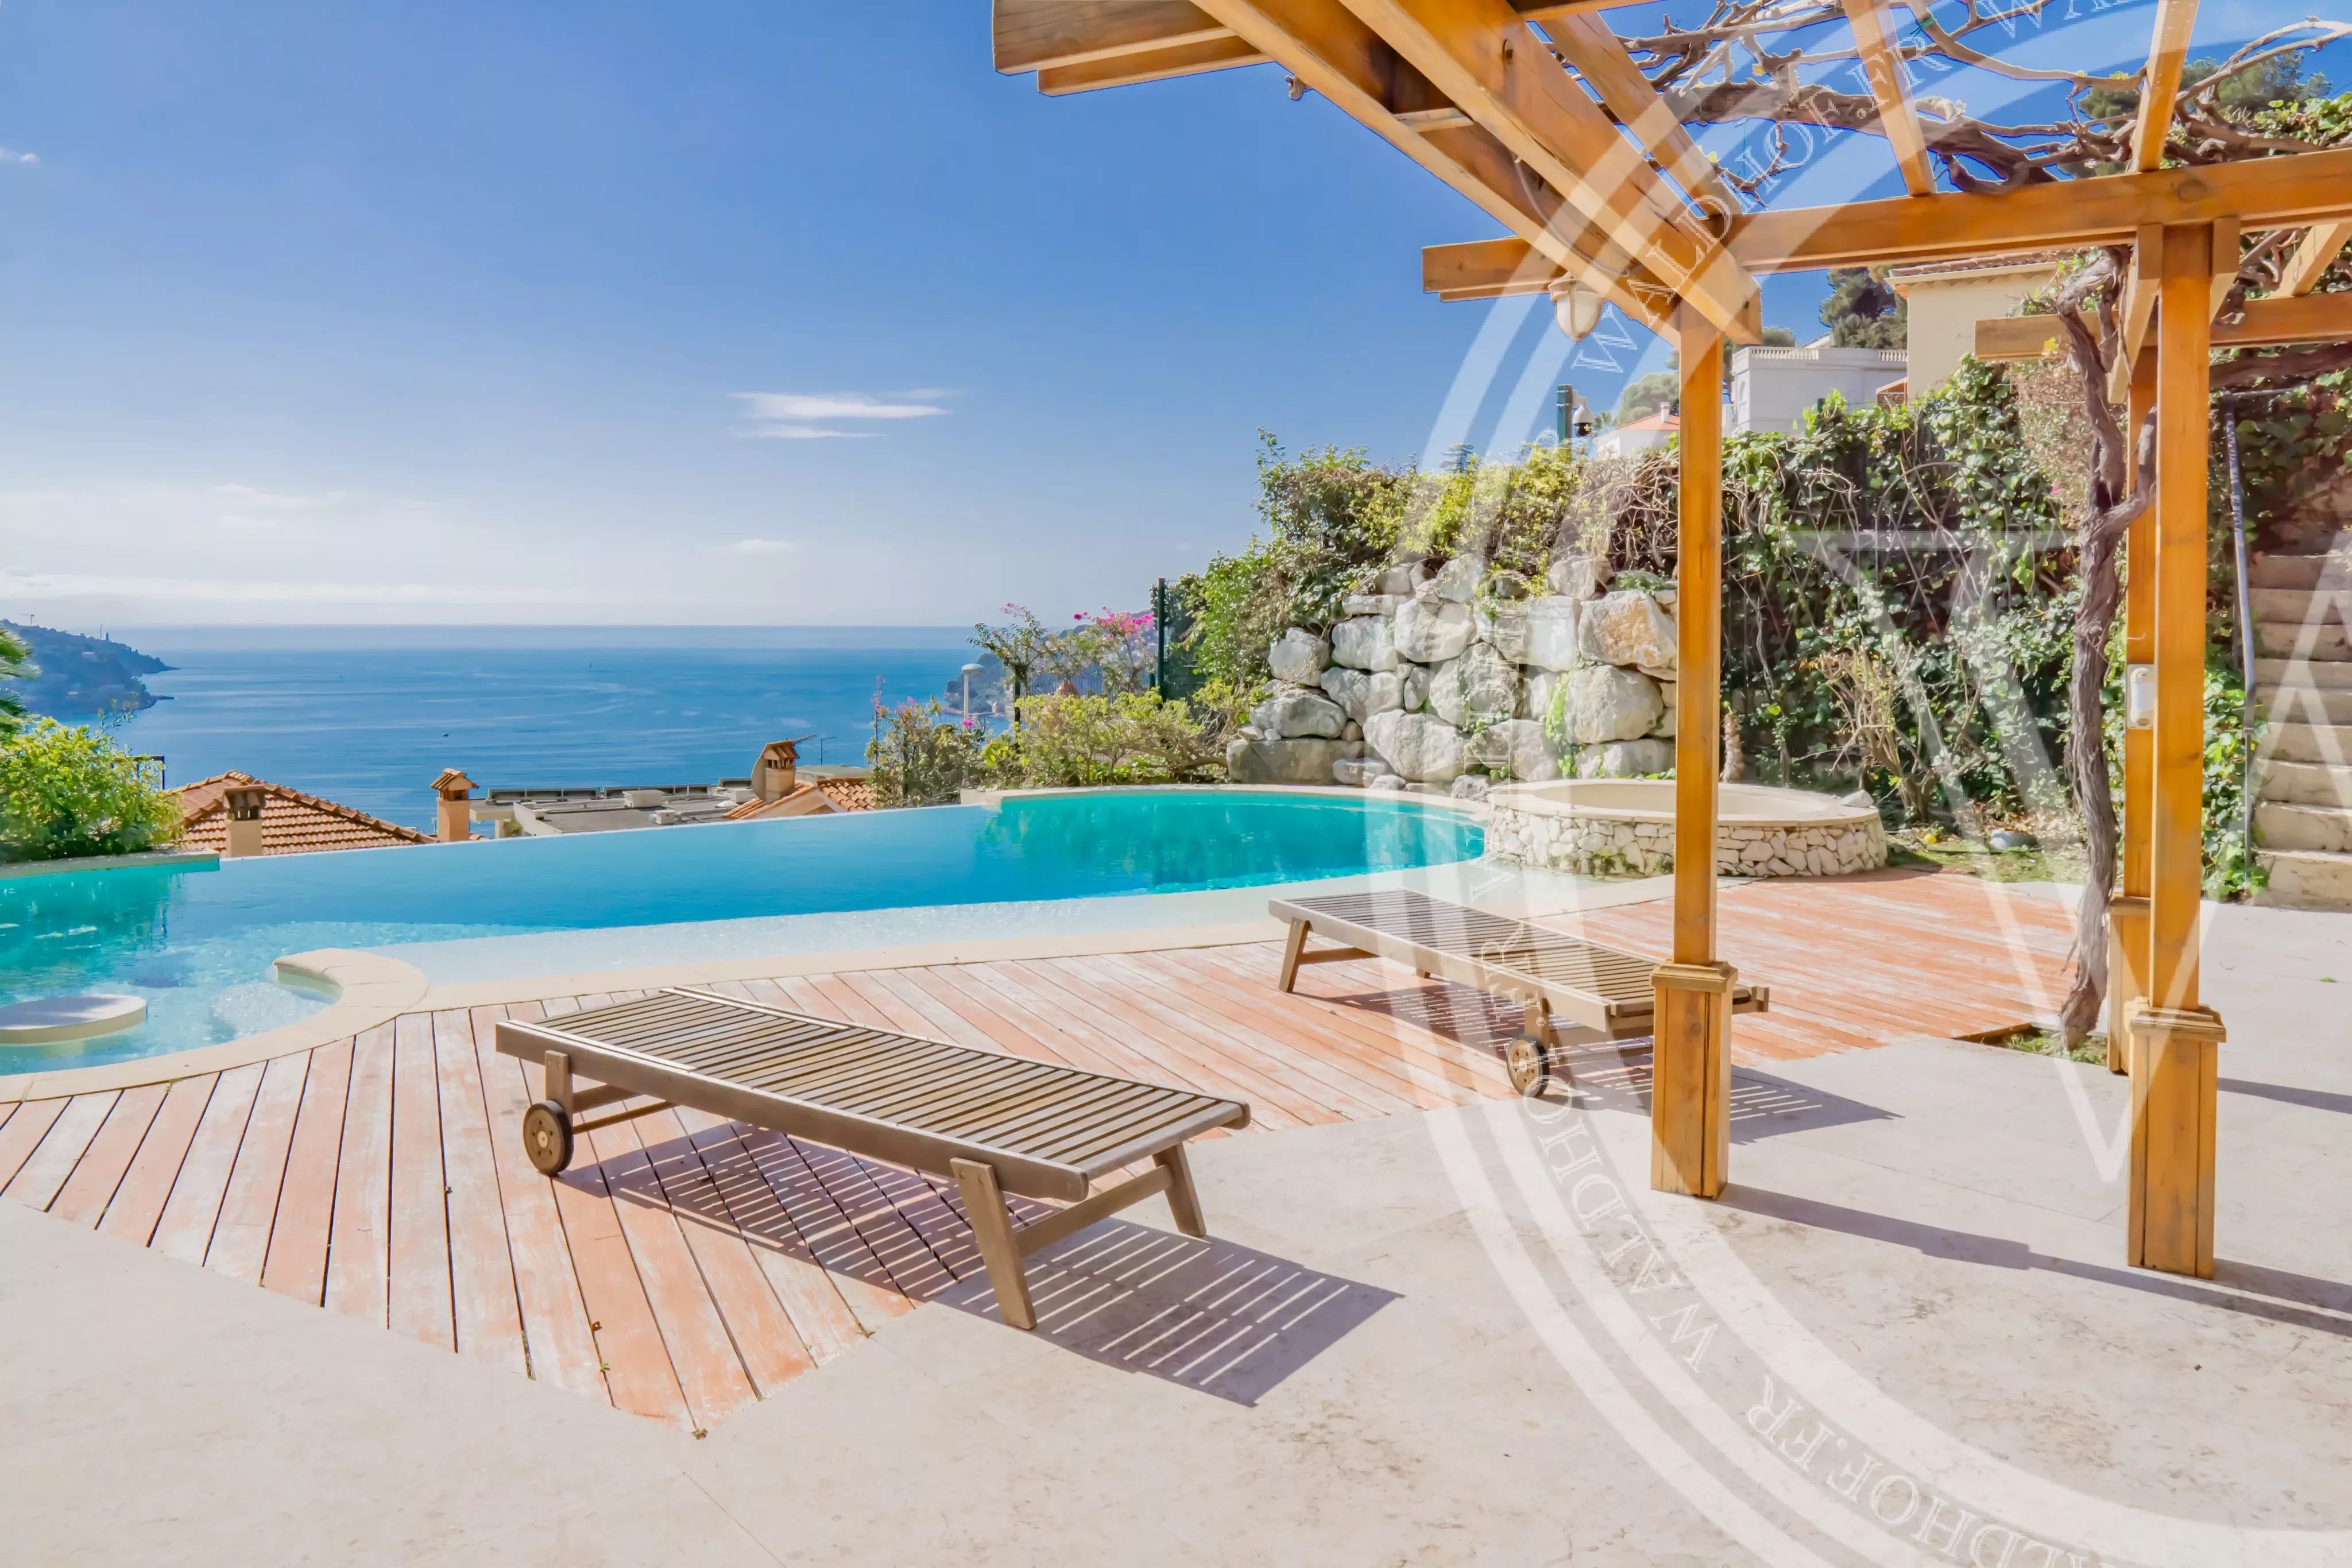 "Stunning Villa with Guest House in Villefranche-sur-Mer: A Seaside Retreat"